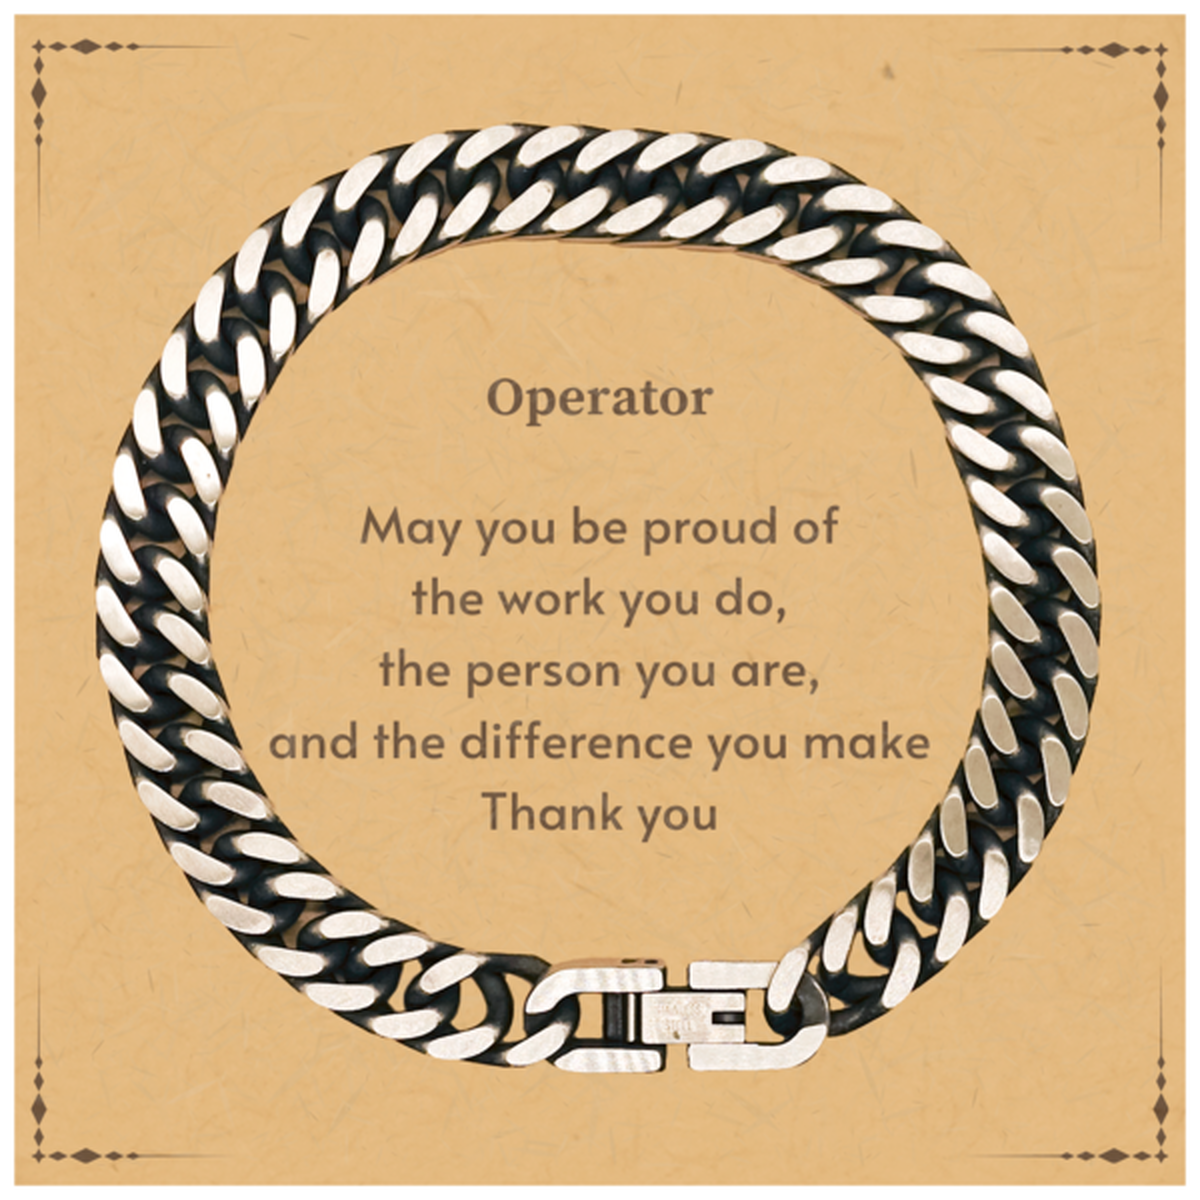 Heartwarming Cuban Link Chain Bracelet Retirement Coworkers Gifts for Operator, Operator May You be proud of the work you do, the person you are Gifts for Boss Men Women Friends